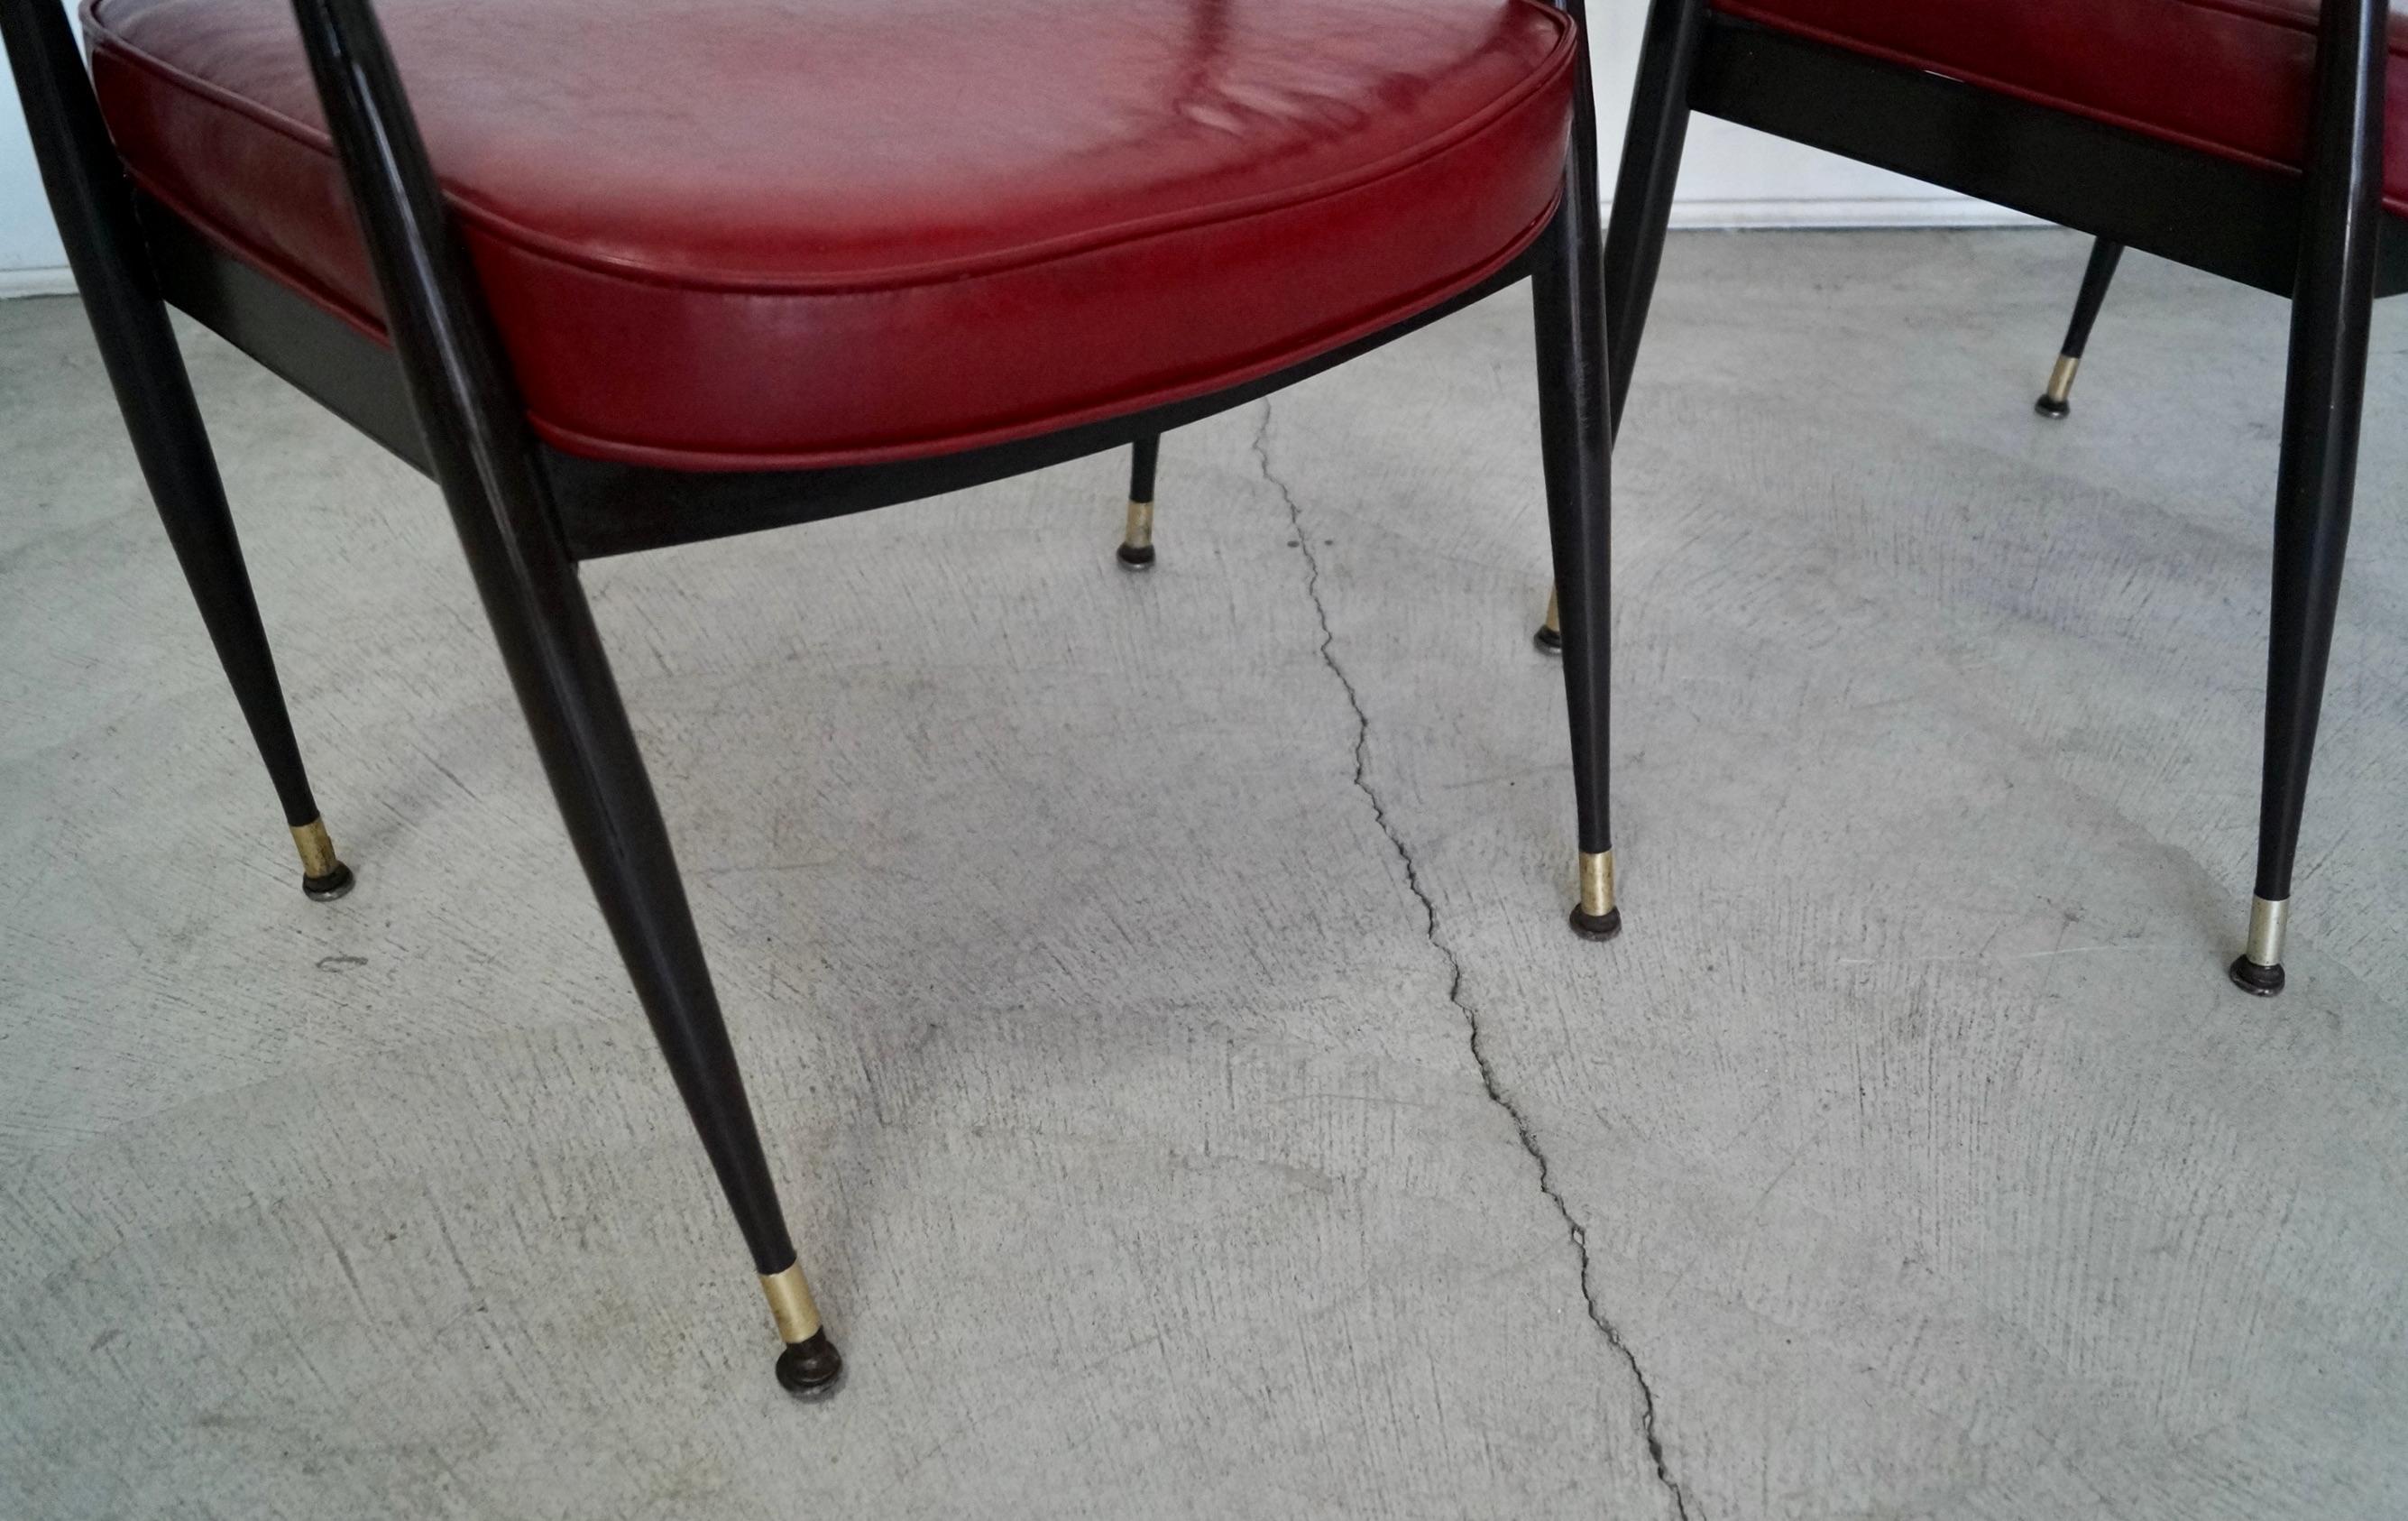 1970's Mid-Century Modern Metal & Wood Armchairs - a Pair For Sale 15